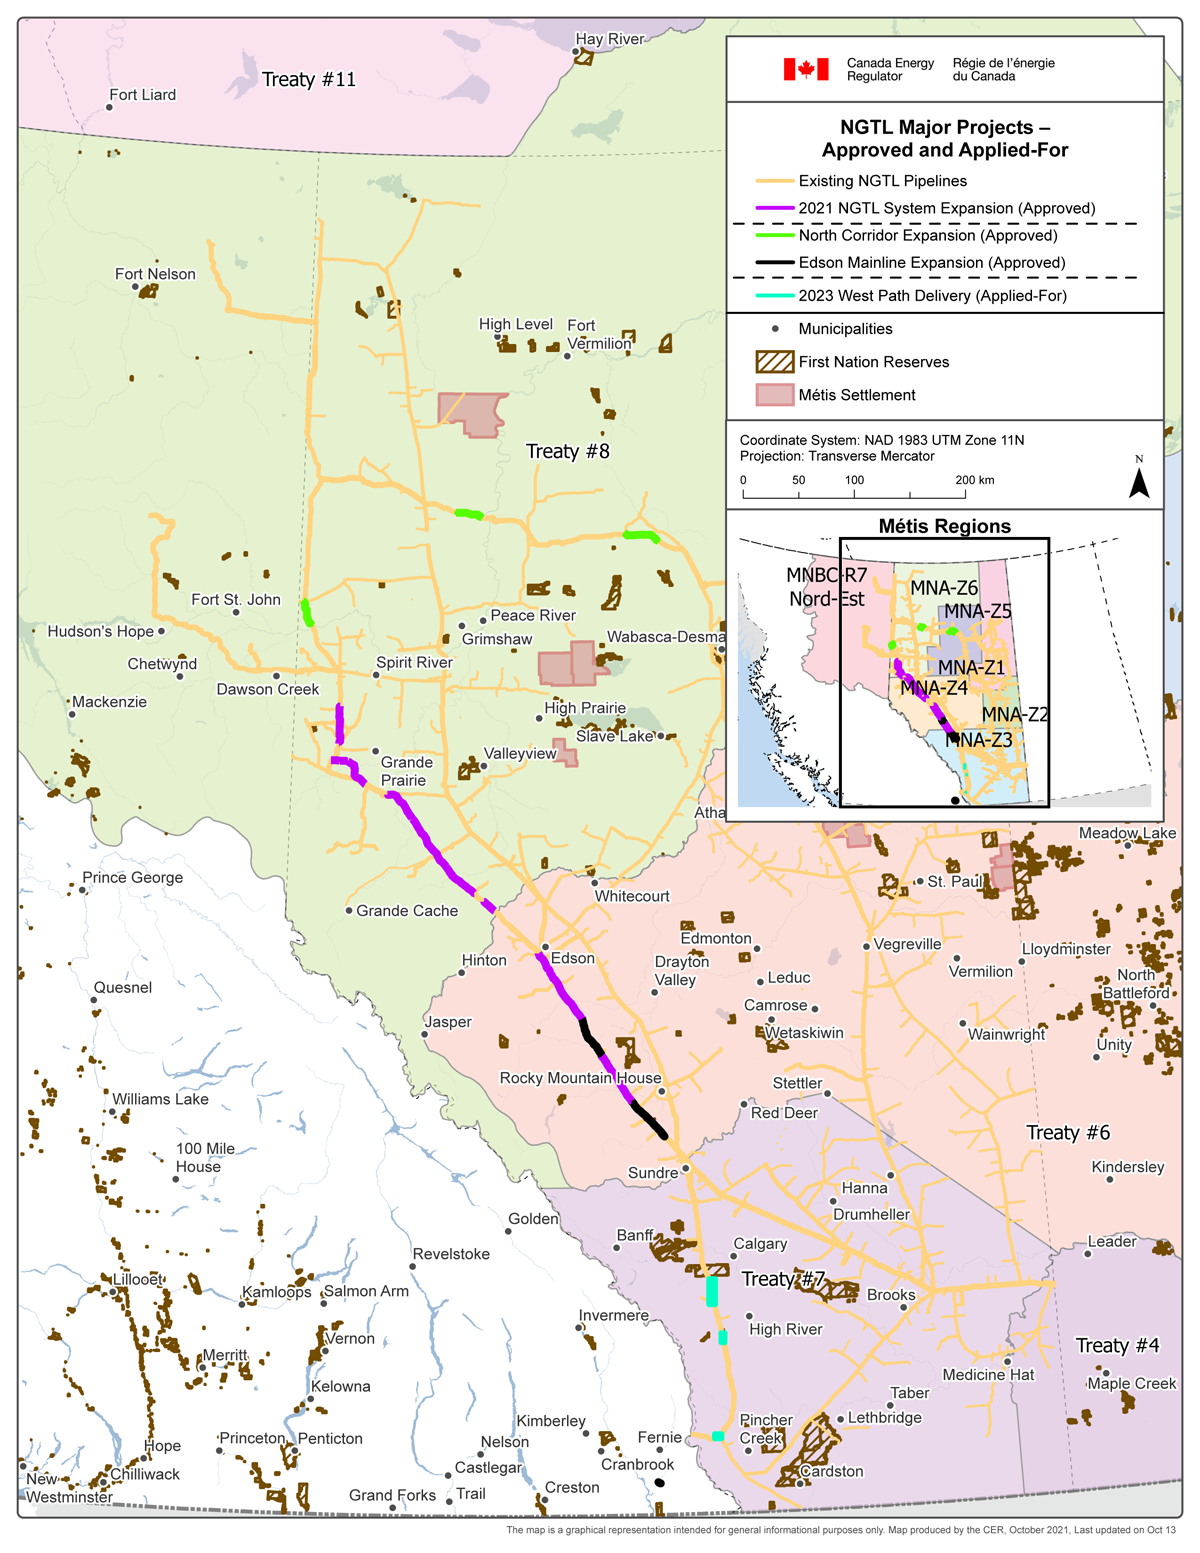 Figure 1: Map of NGTL Major Projects: Approved and Under Review